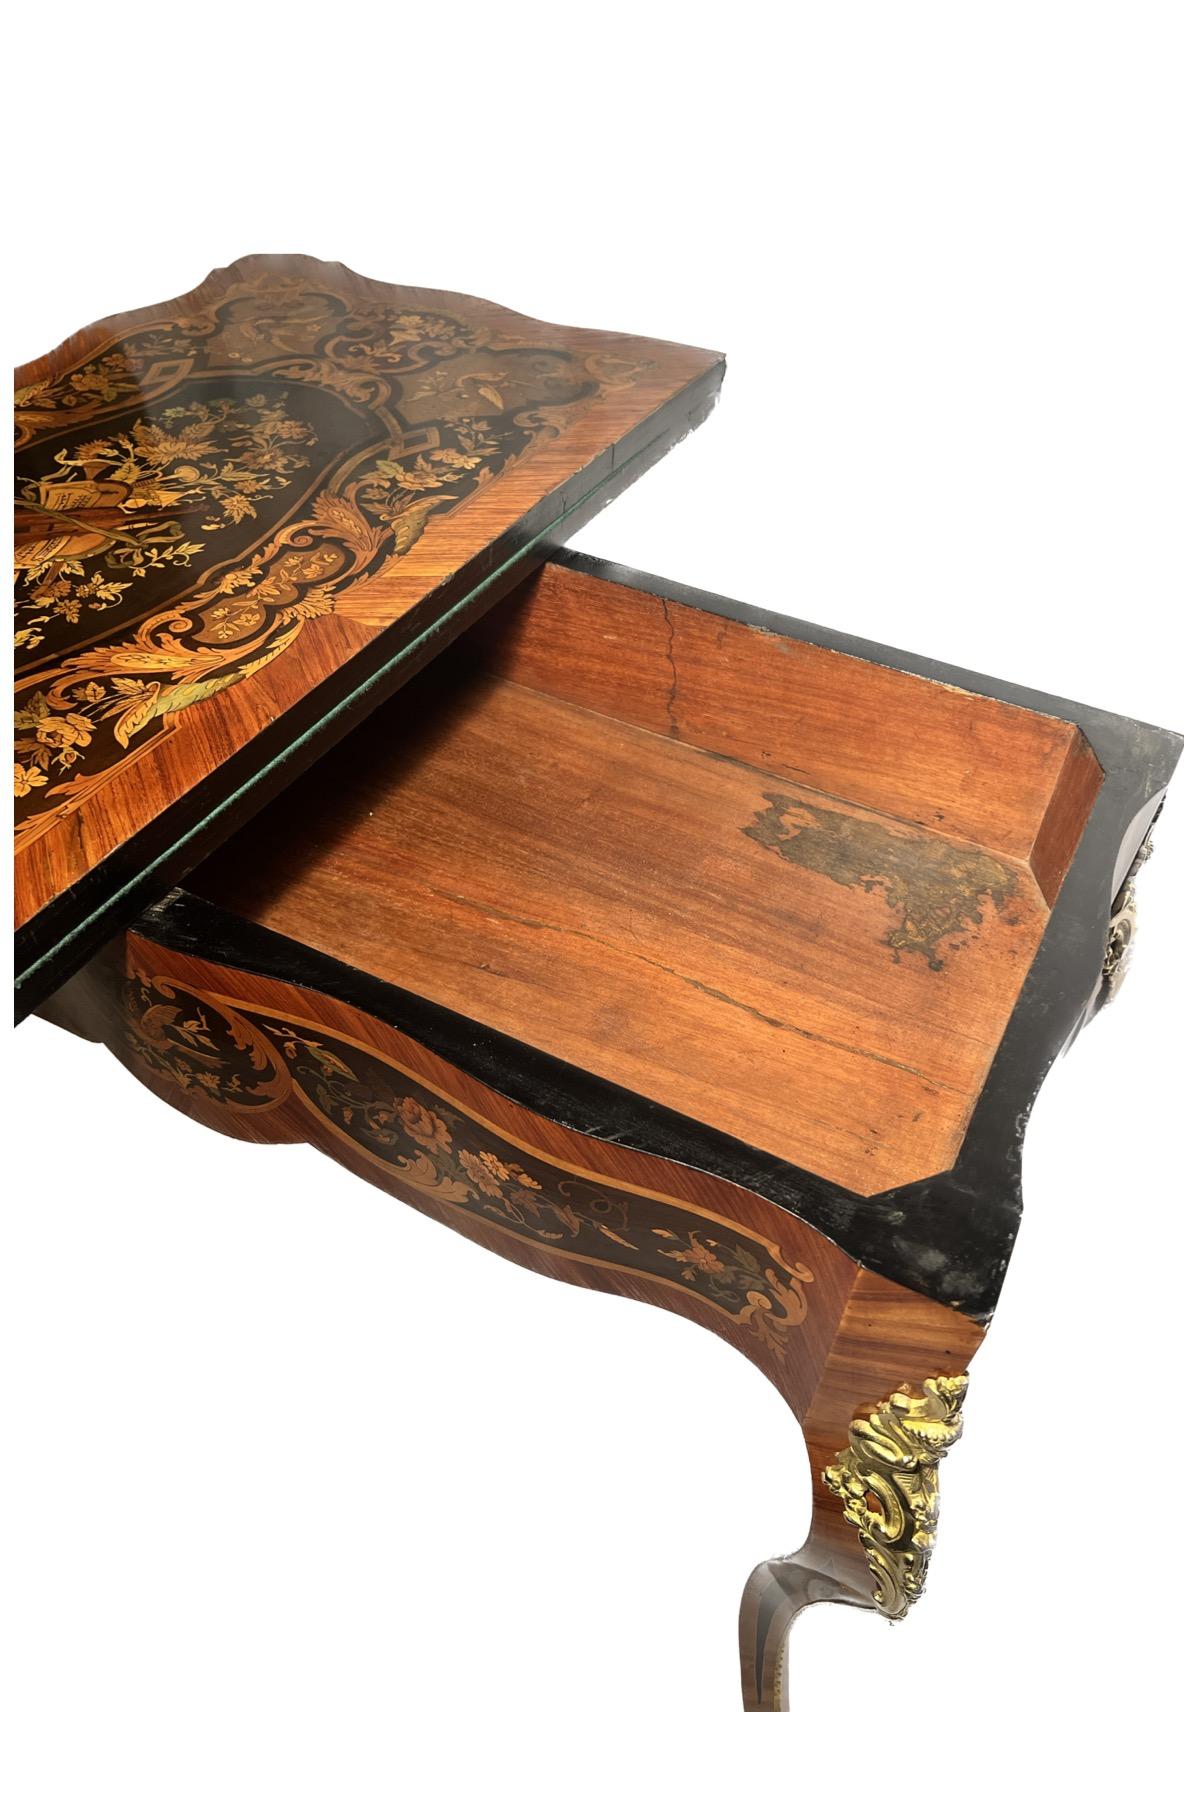 Finest Antique Ormolu Mounted Kingwood Inlaid Card Table  For Sale 2